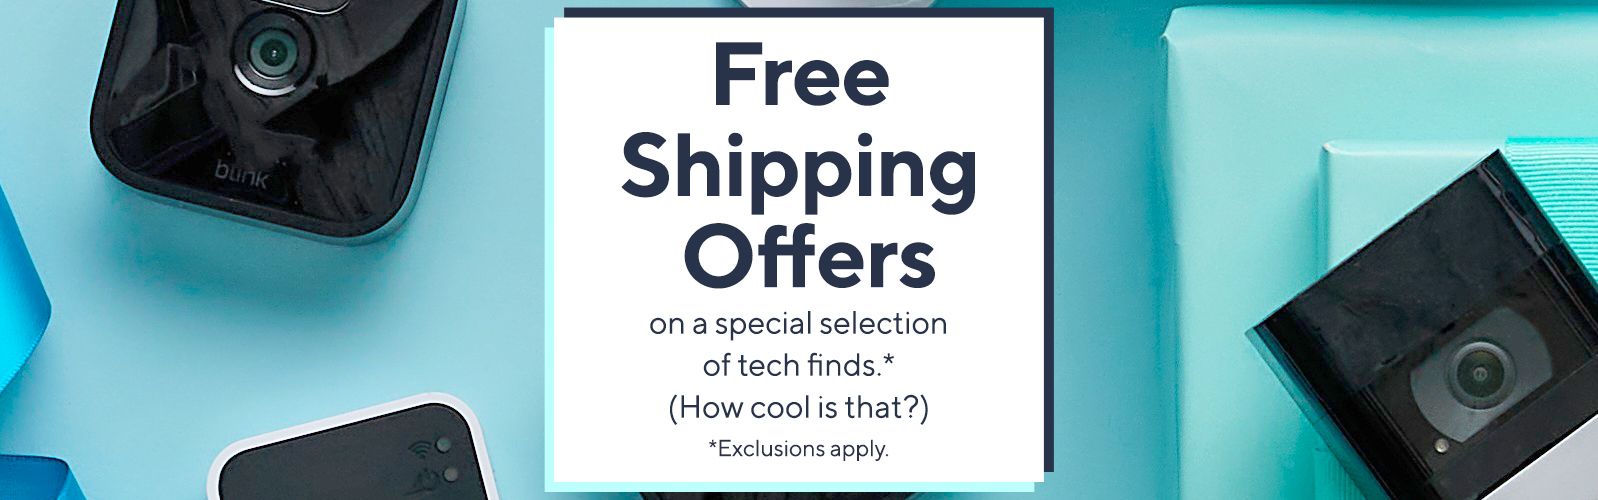 Free Shipping Offers on a special selection of tech finds.* (How cool is that?) *Exclusions apply.